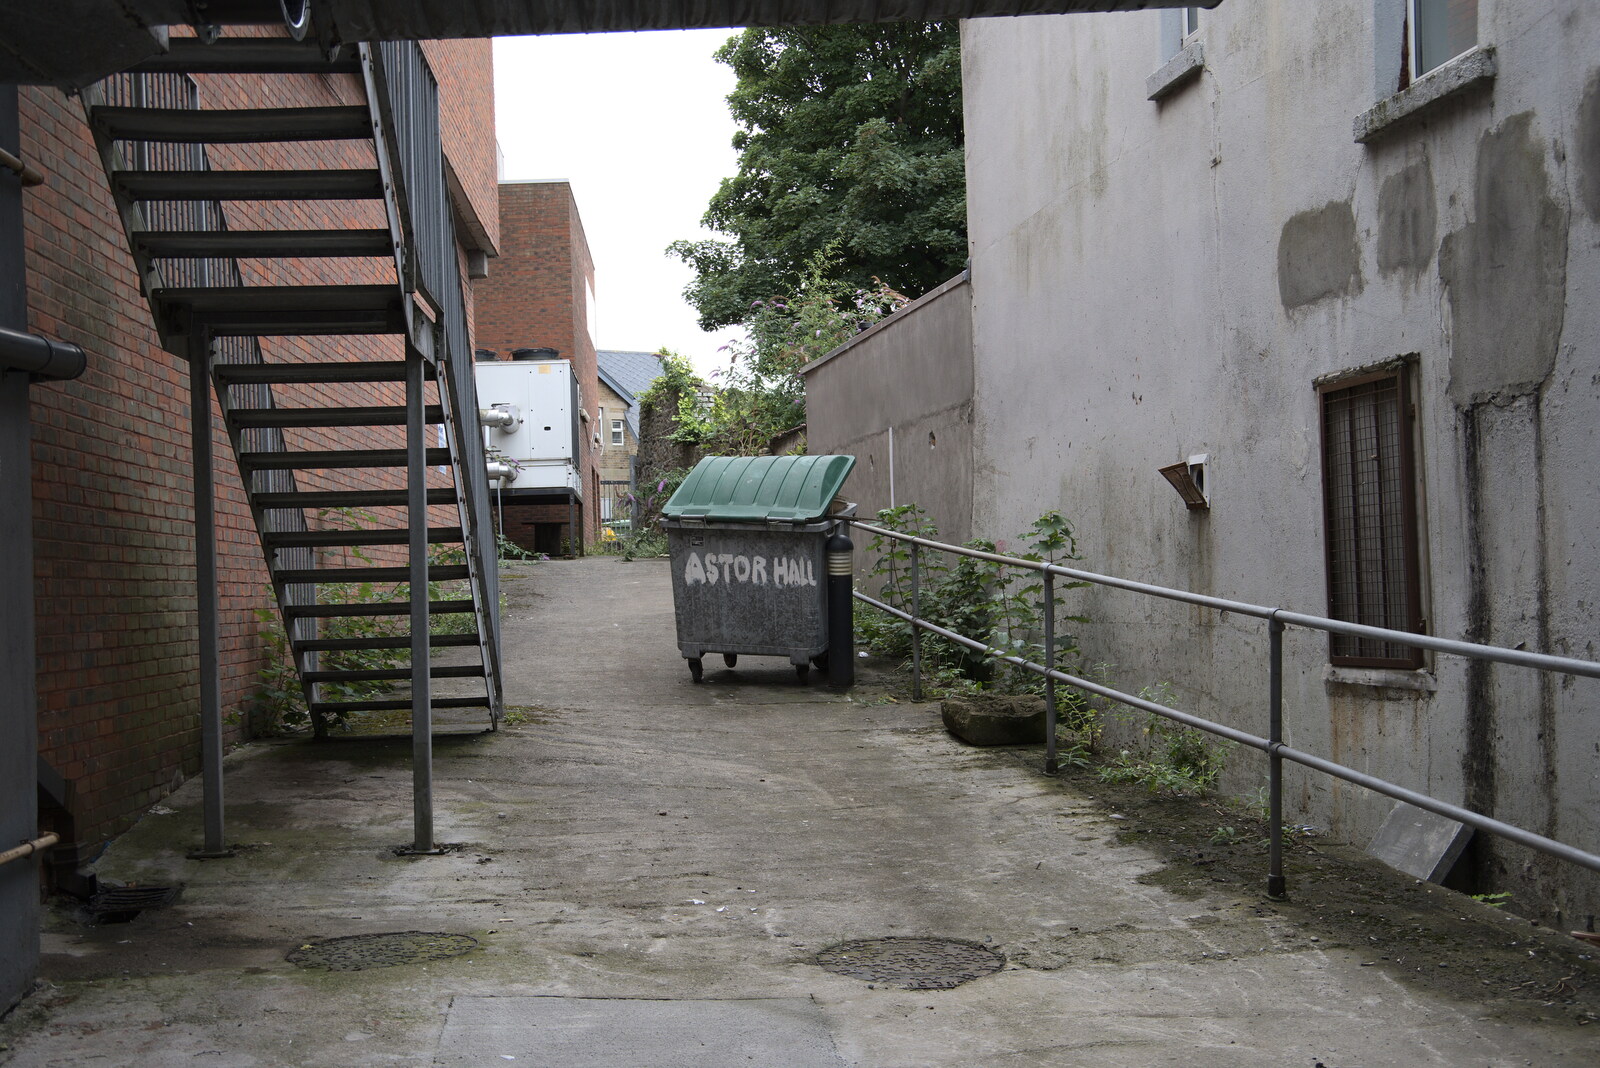 An abandoned wheelie bin in an alley from Manorhamilton and the Street Art of Dún Laoghaire, Ireland - 15th August 2021